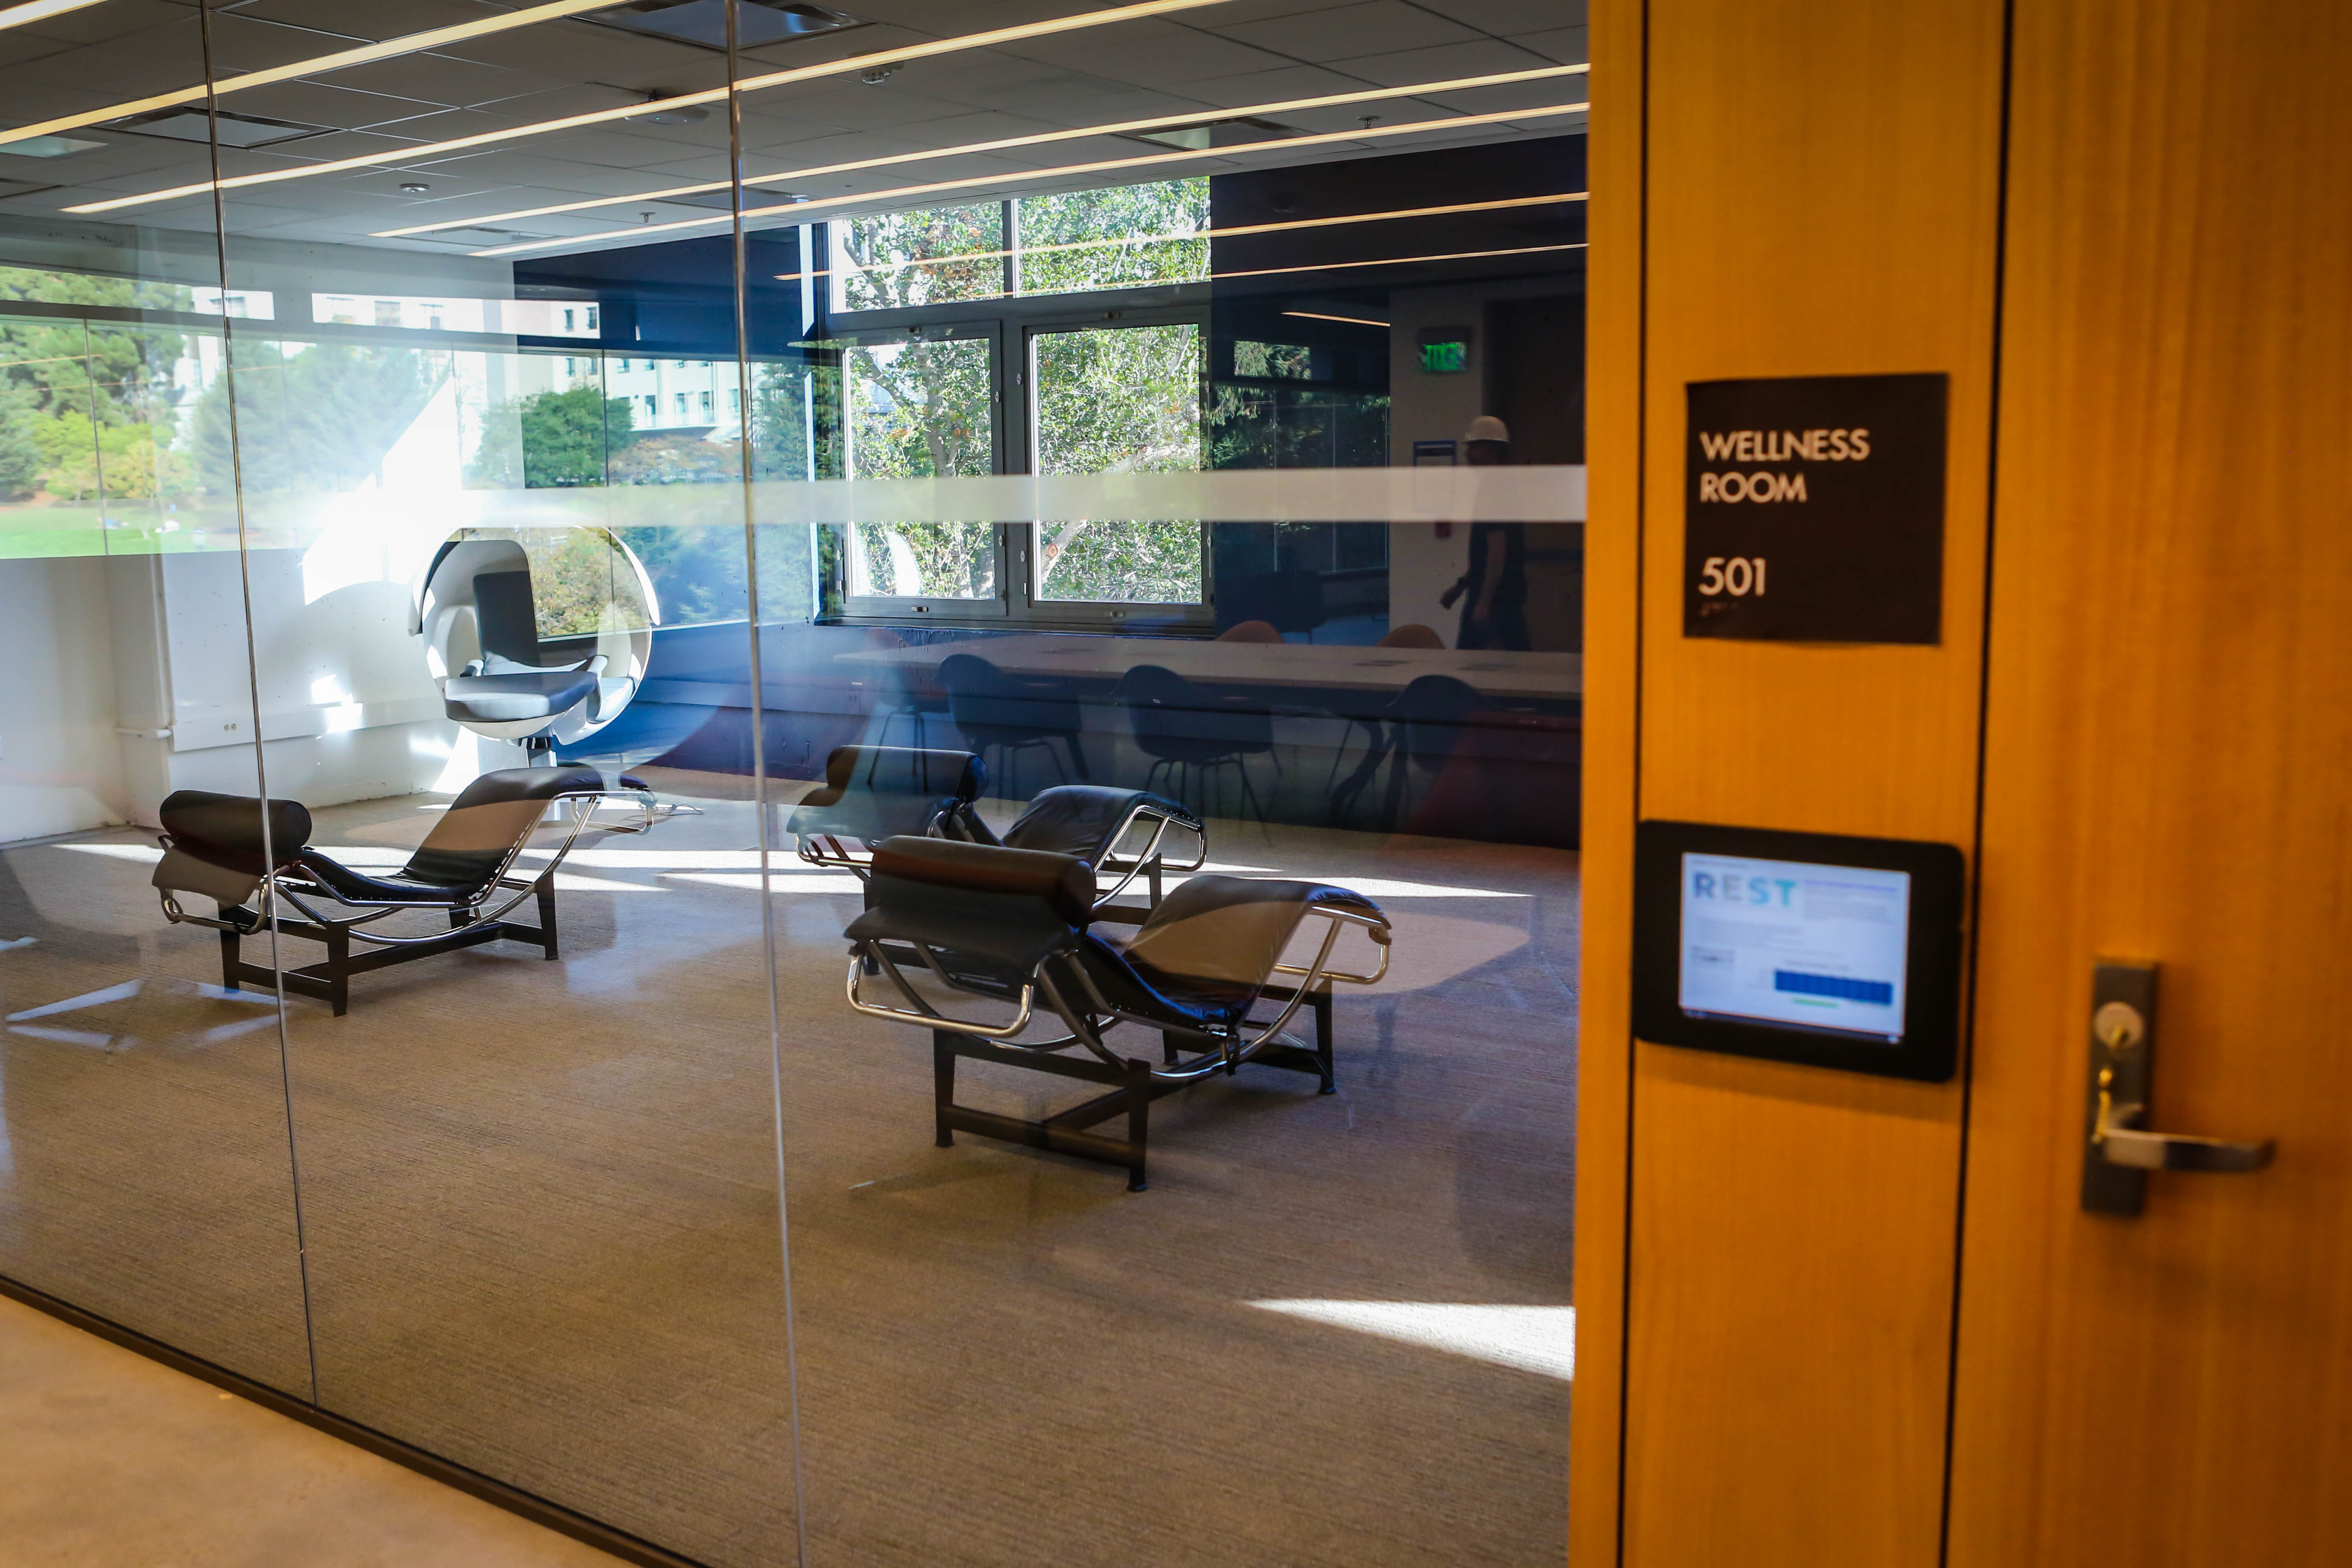 Image of a wellness Room in Moffitt Library at UC Berkeley. A place for short rests, quiet thought, meditation or prayer and home to the ASUC sponsored REST Zone.